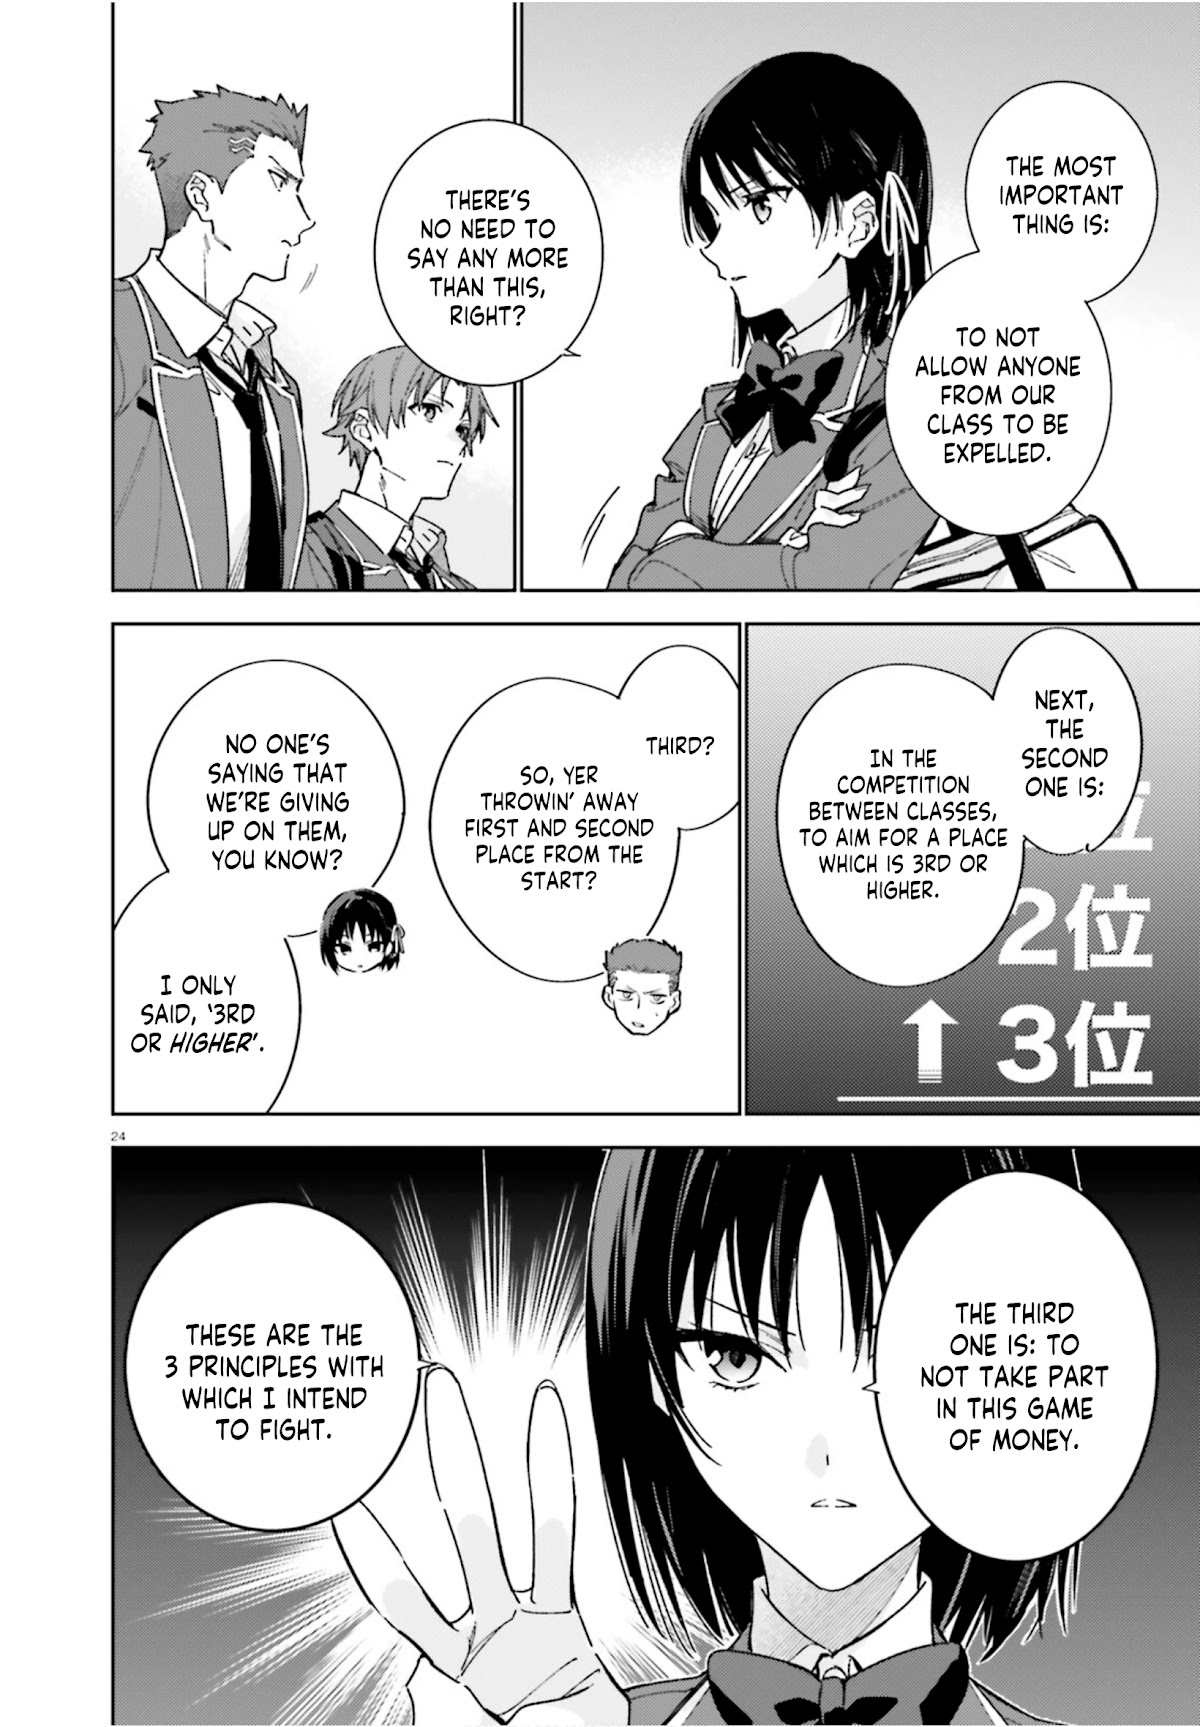 DISC] Classroom of the Elite Chapter 4